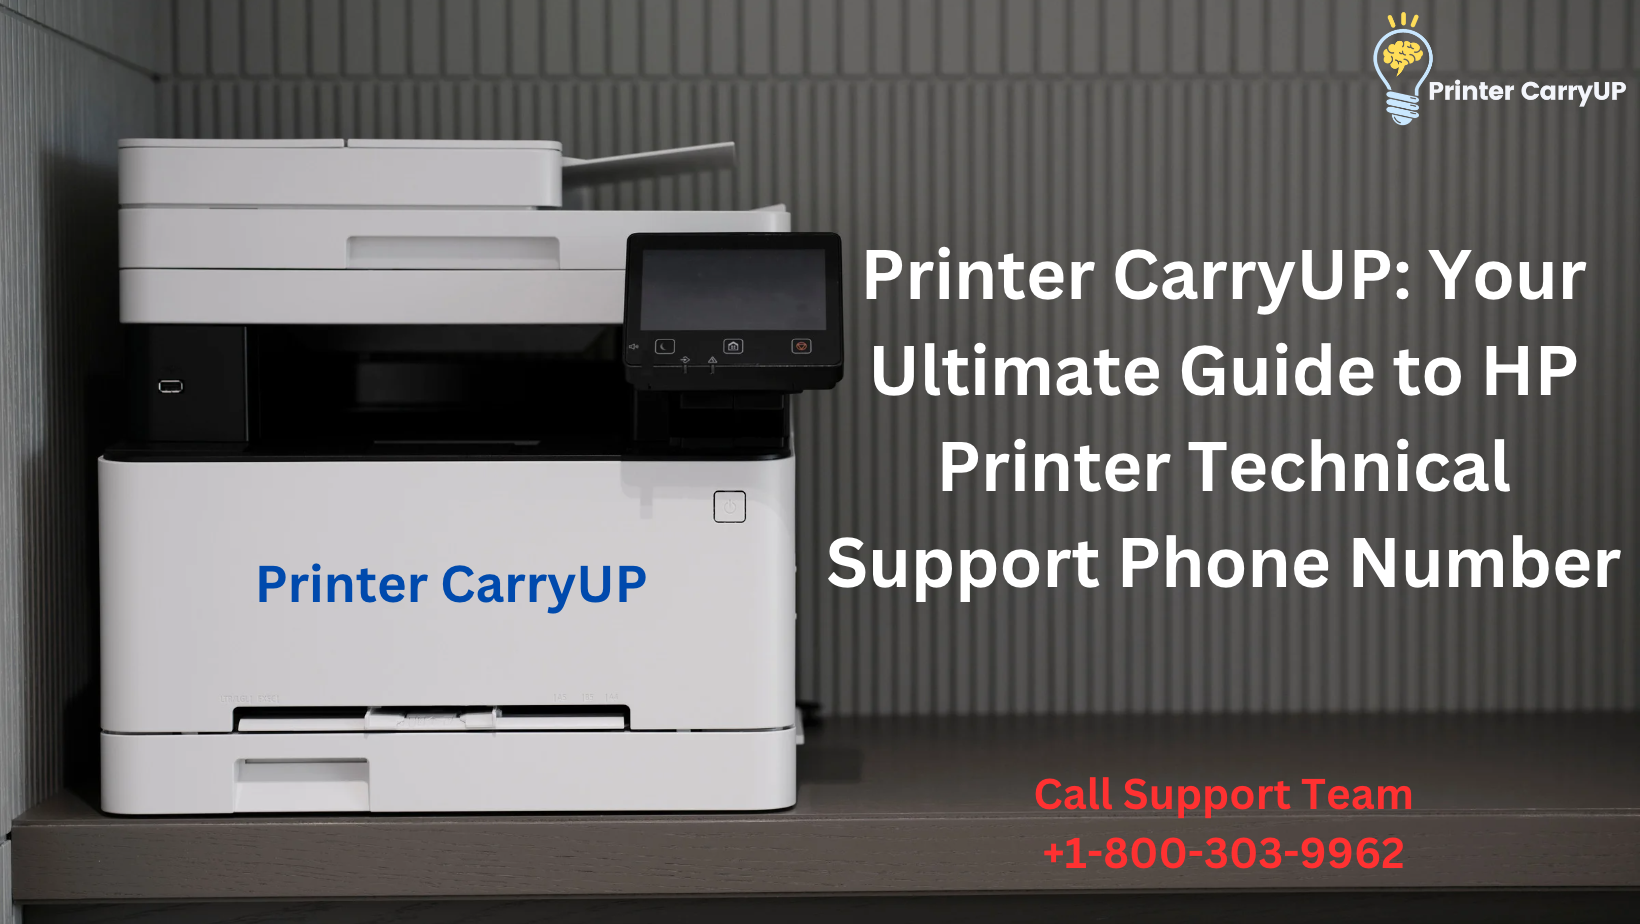 HP Printer Technical Support Phone Number